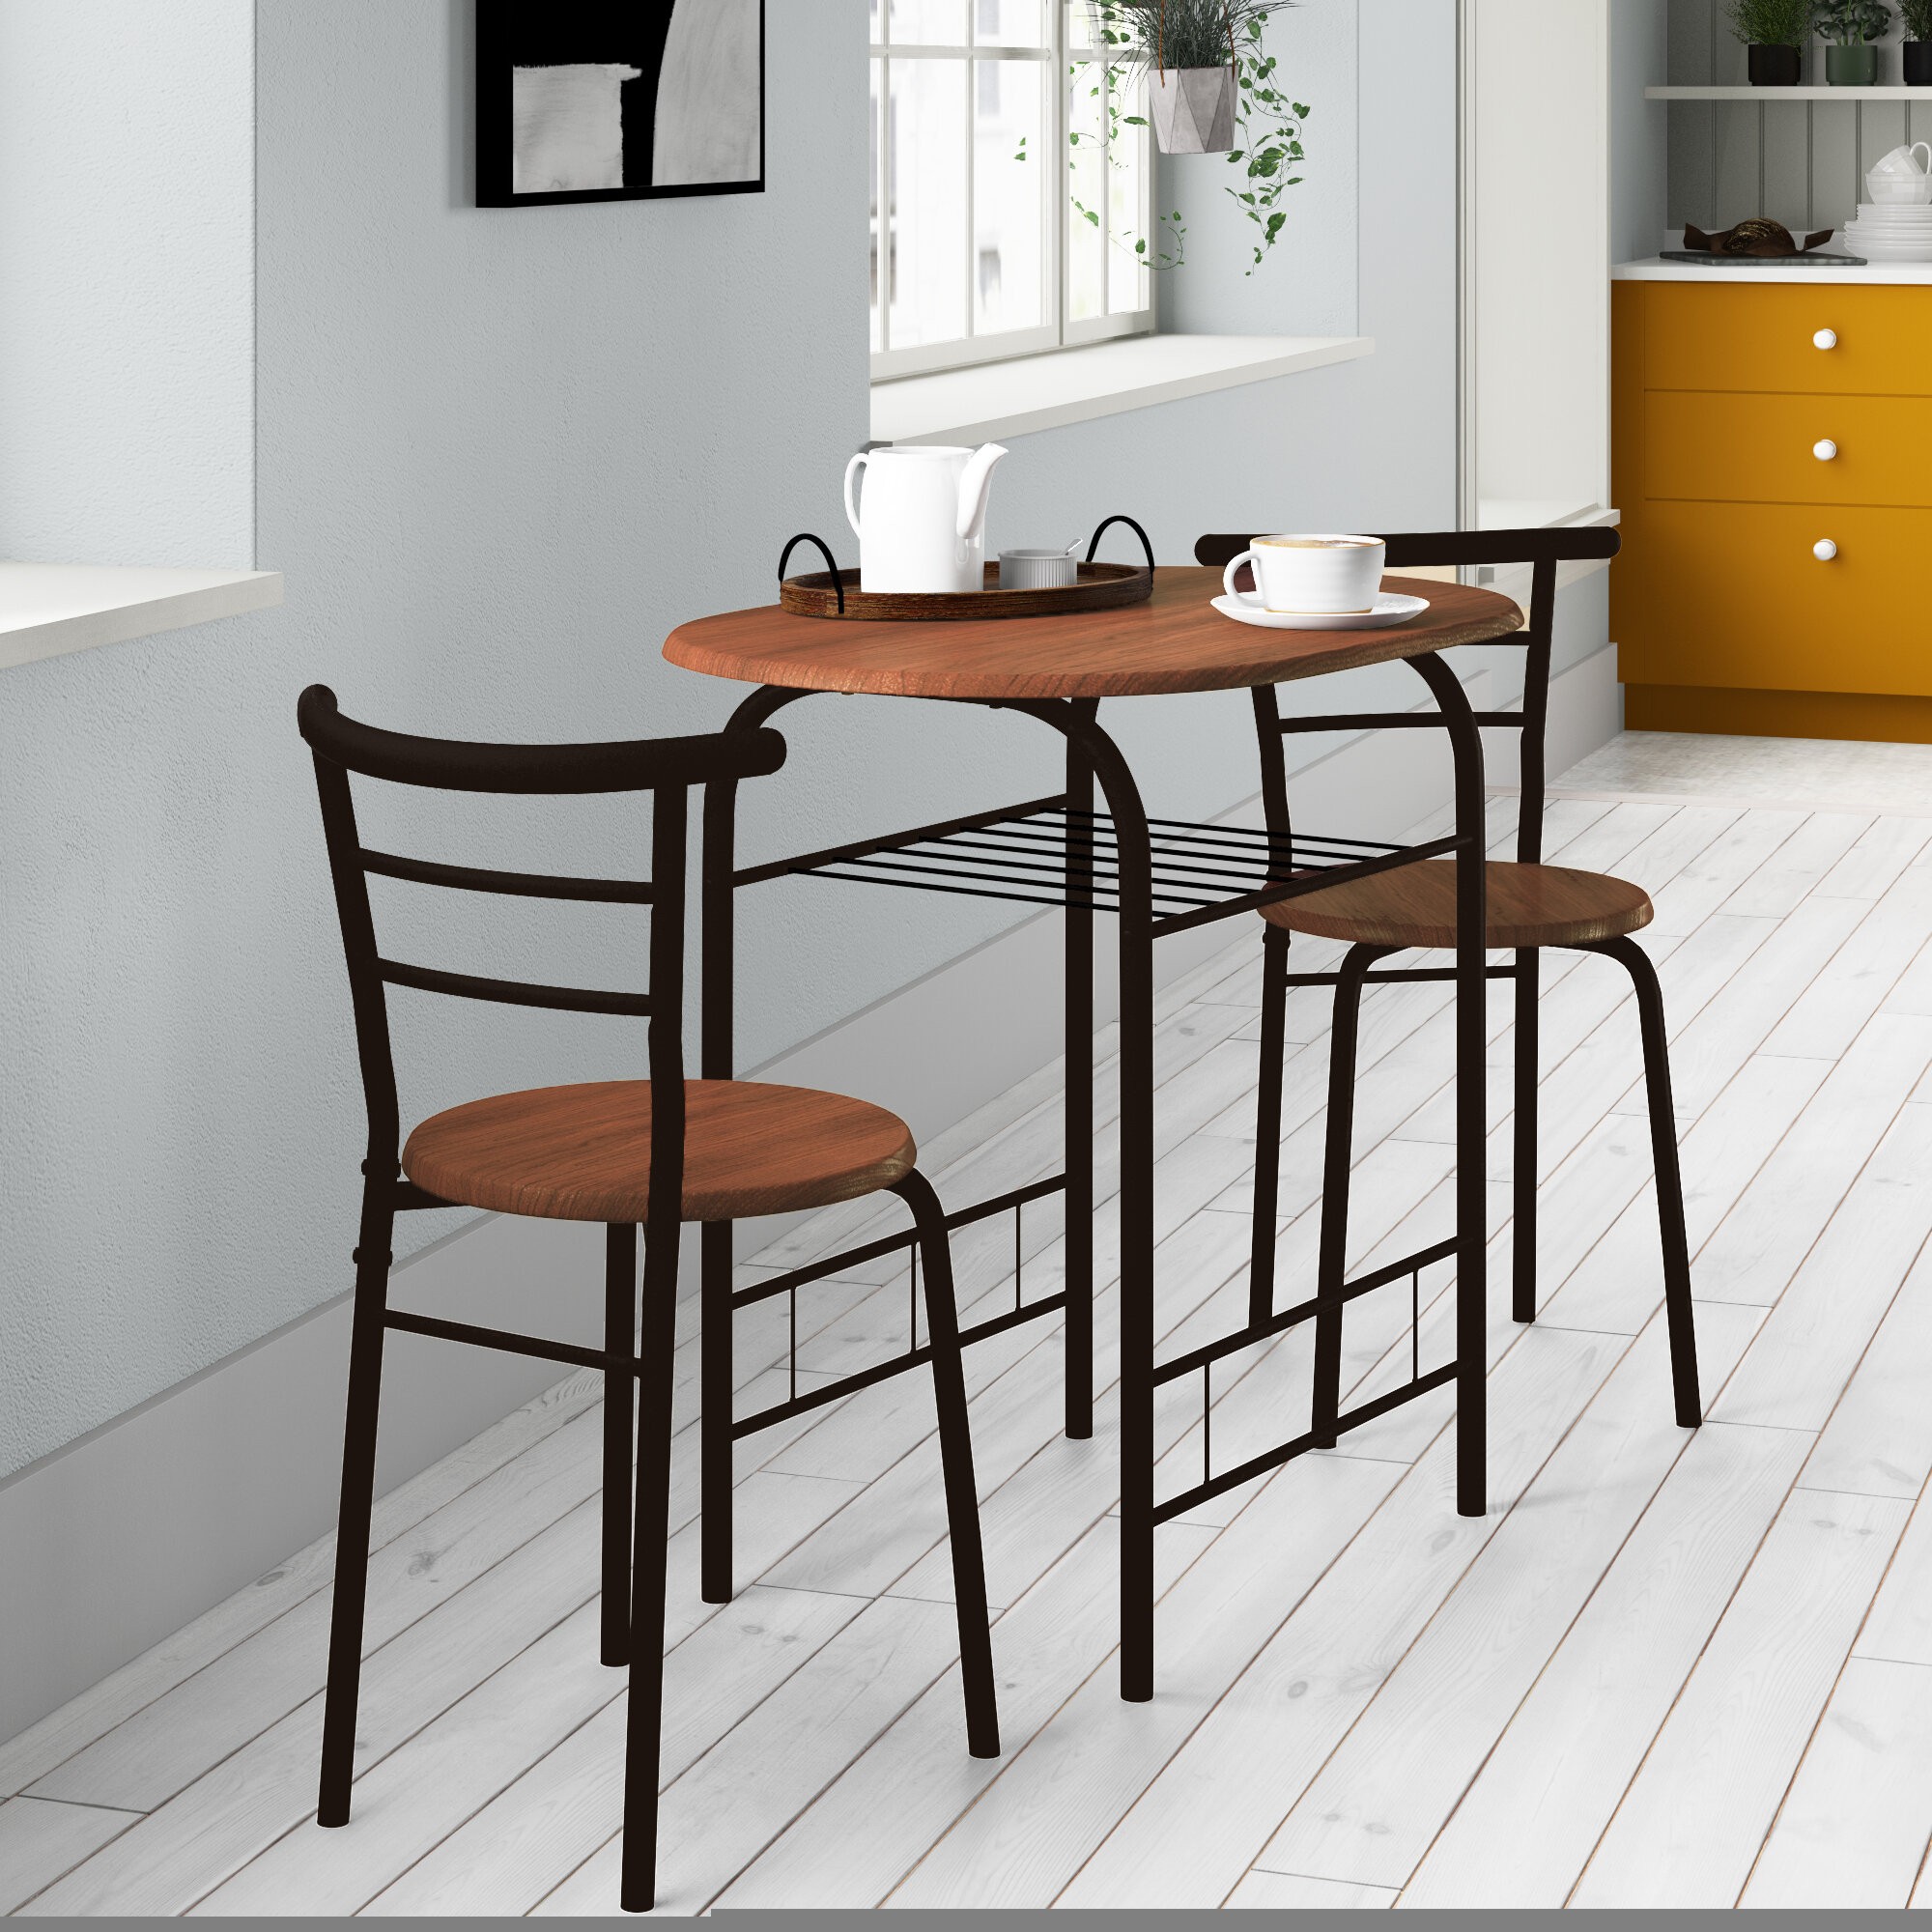 Dinette Sets For Small Kitchen Spaces Ideas On Foter